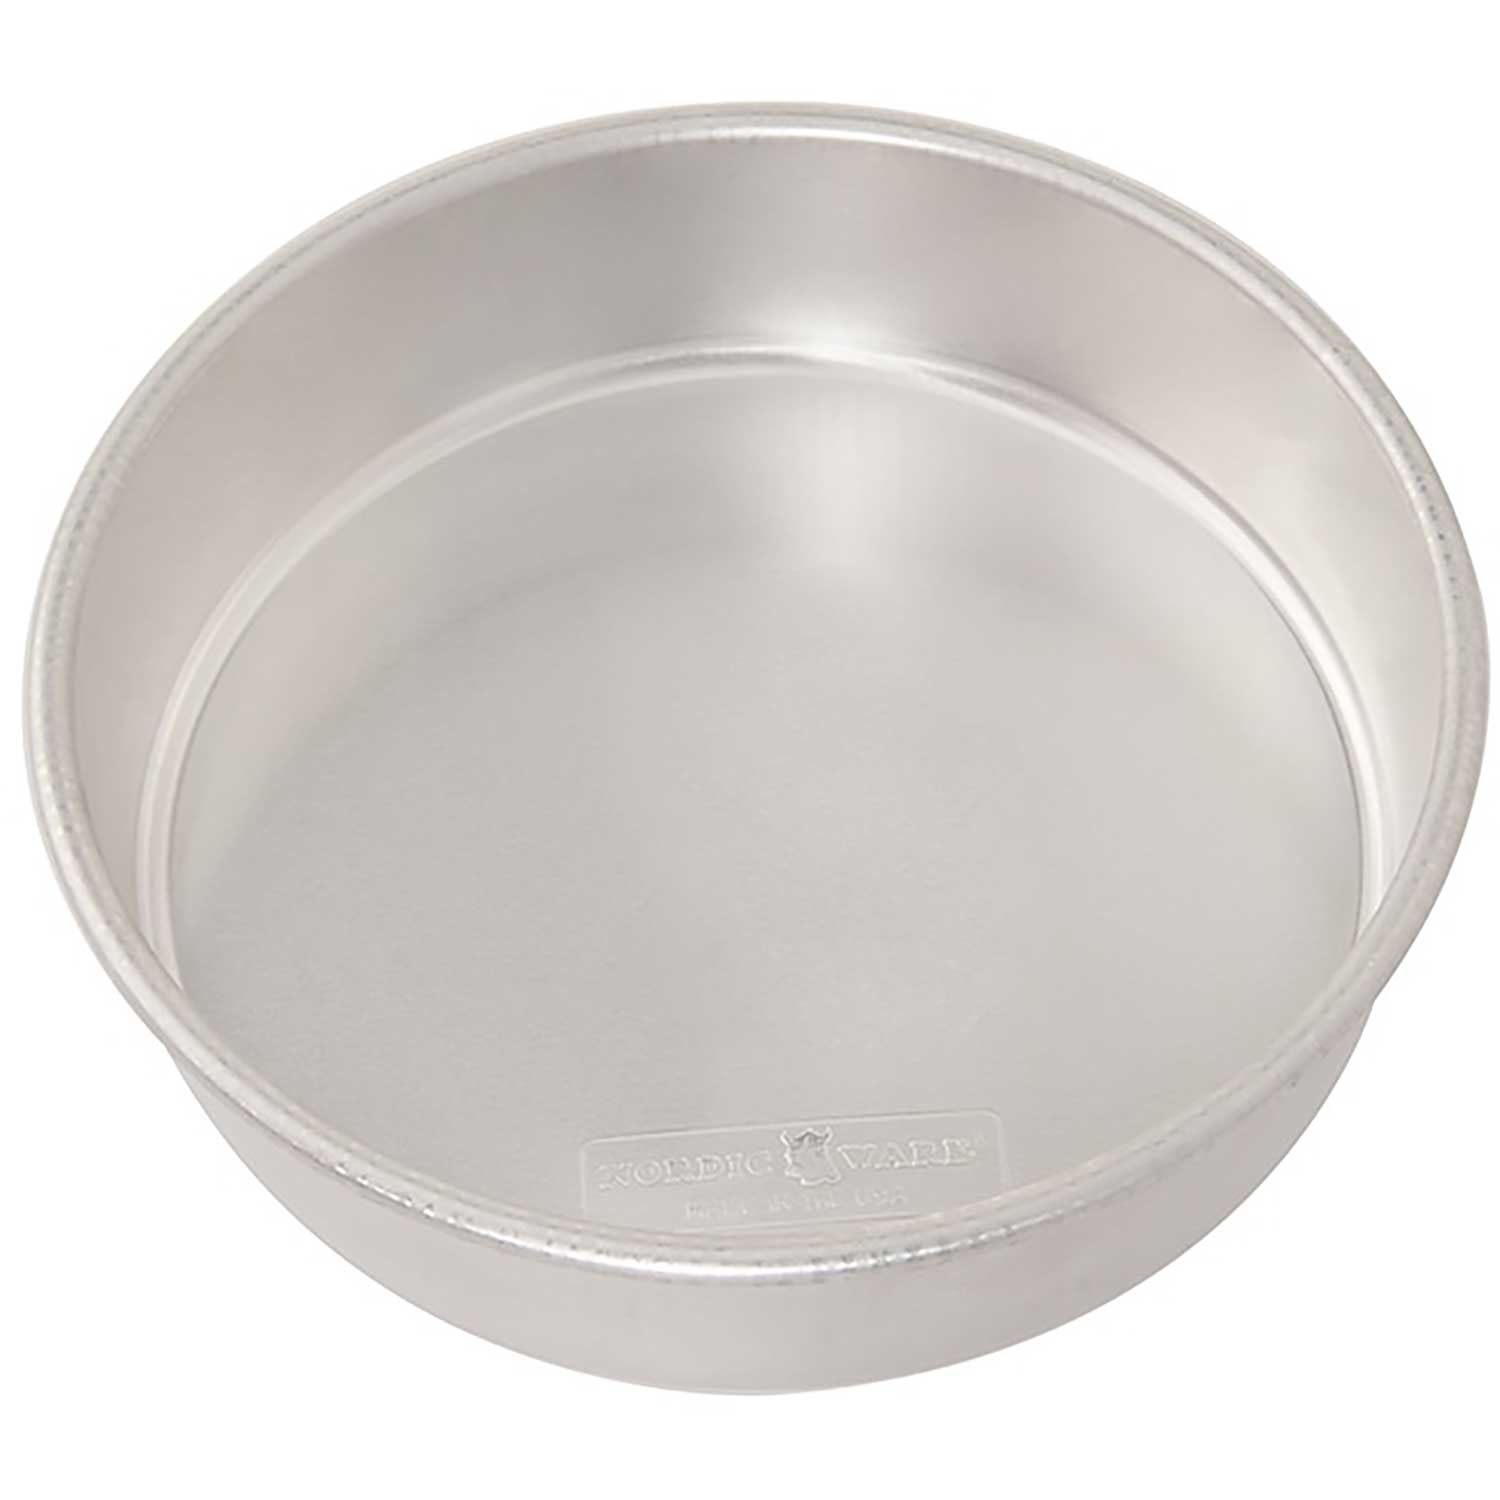 Naturals® 9 Square Cake Pan with Lid - Nordic Ware